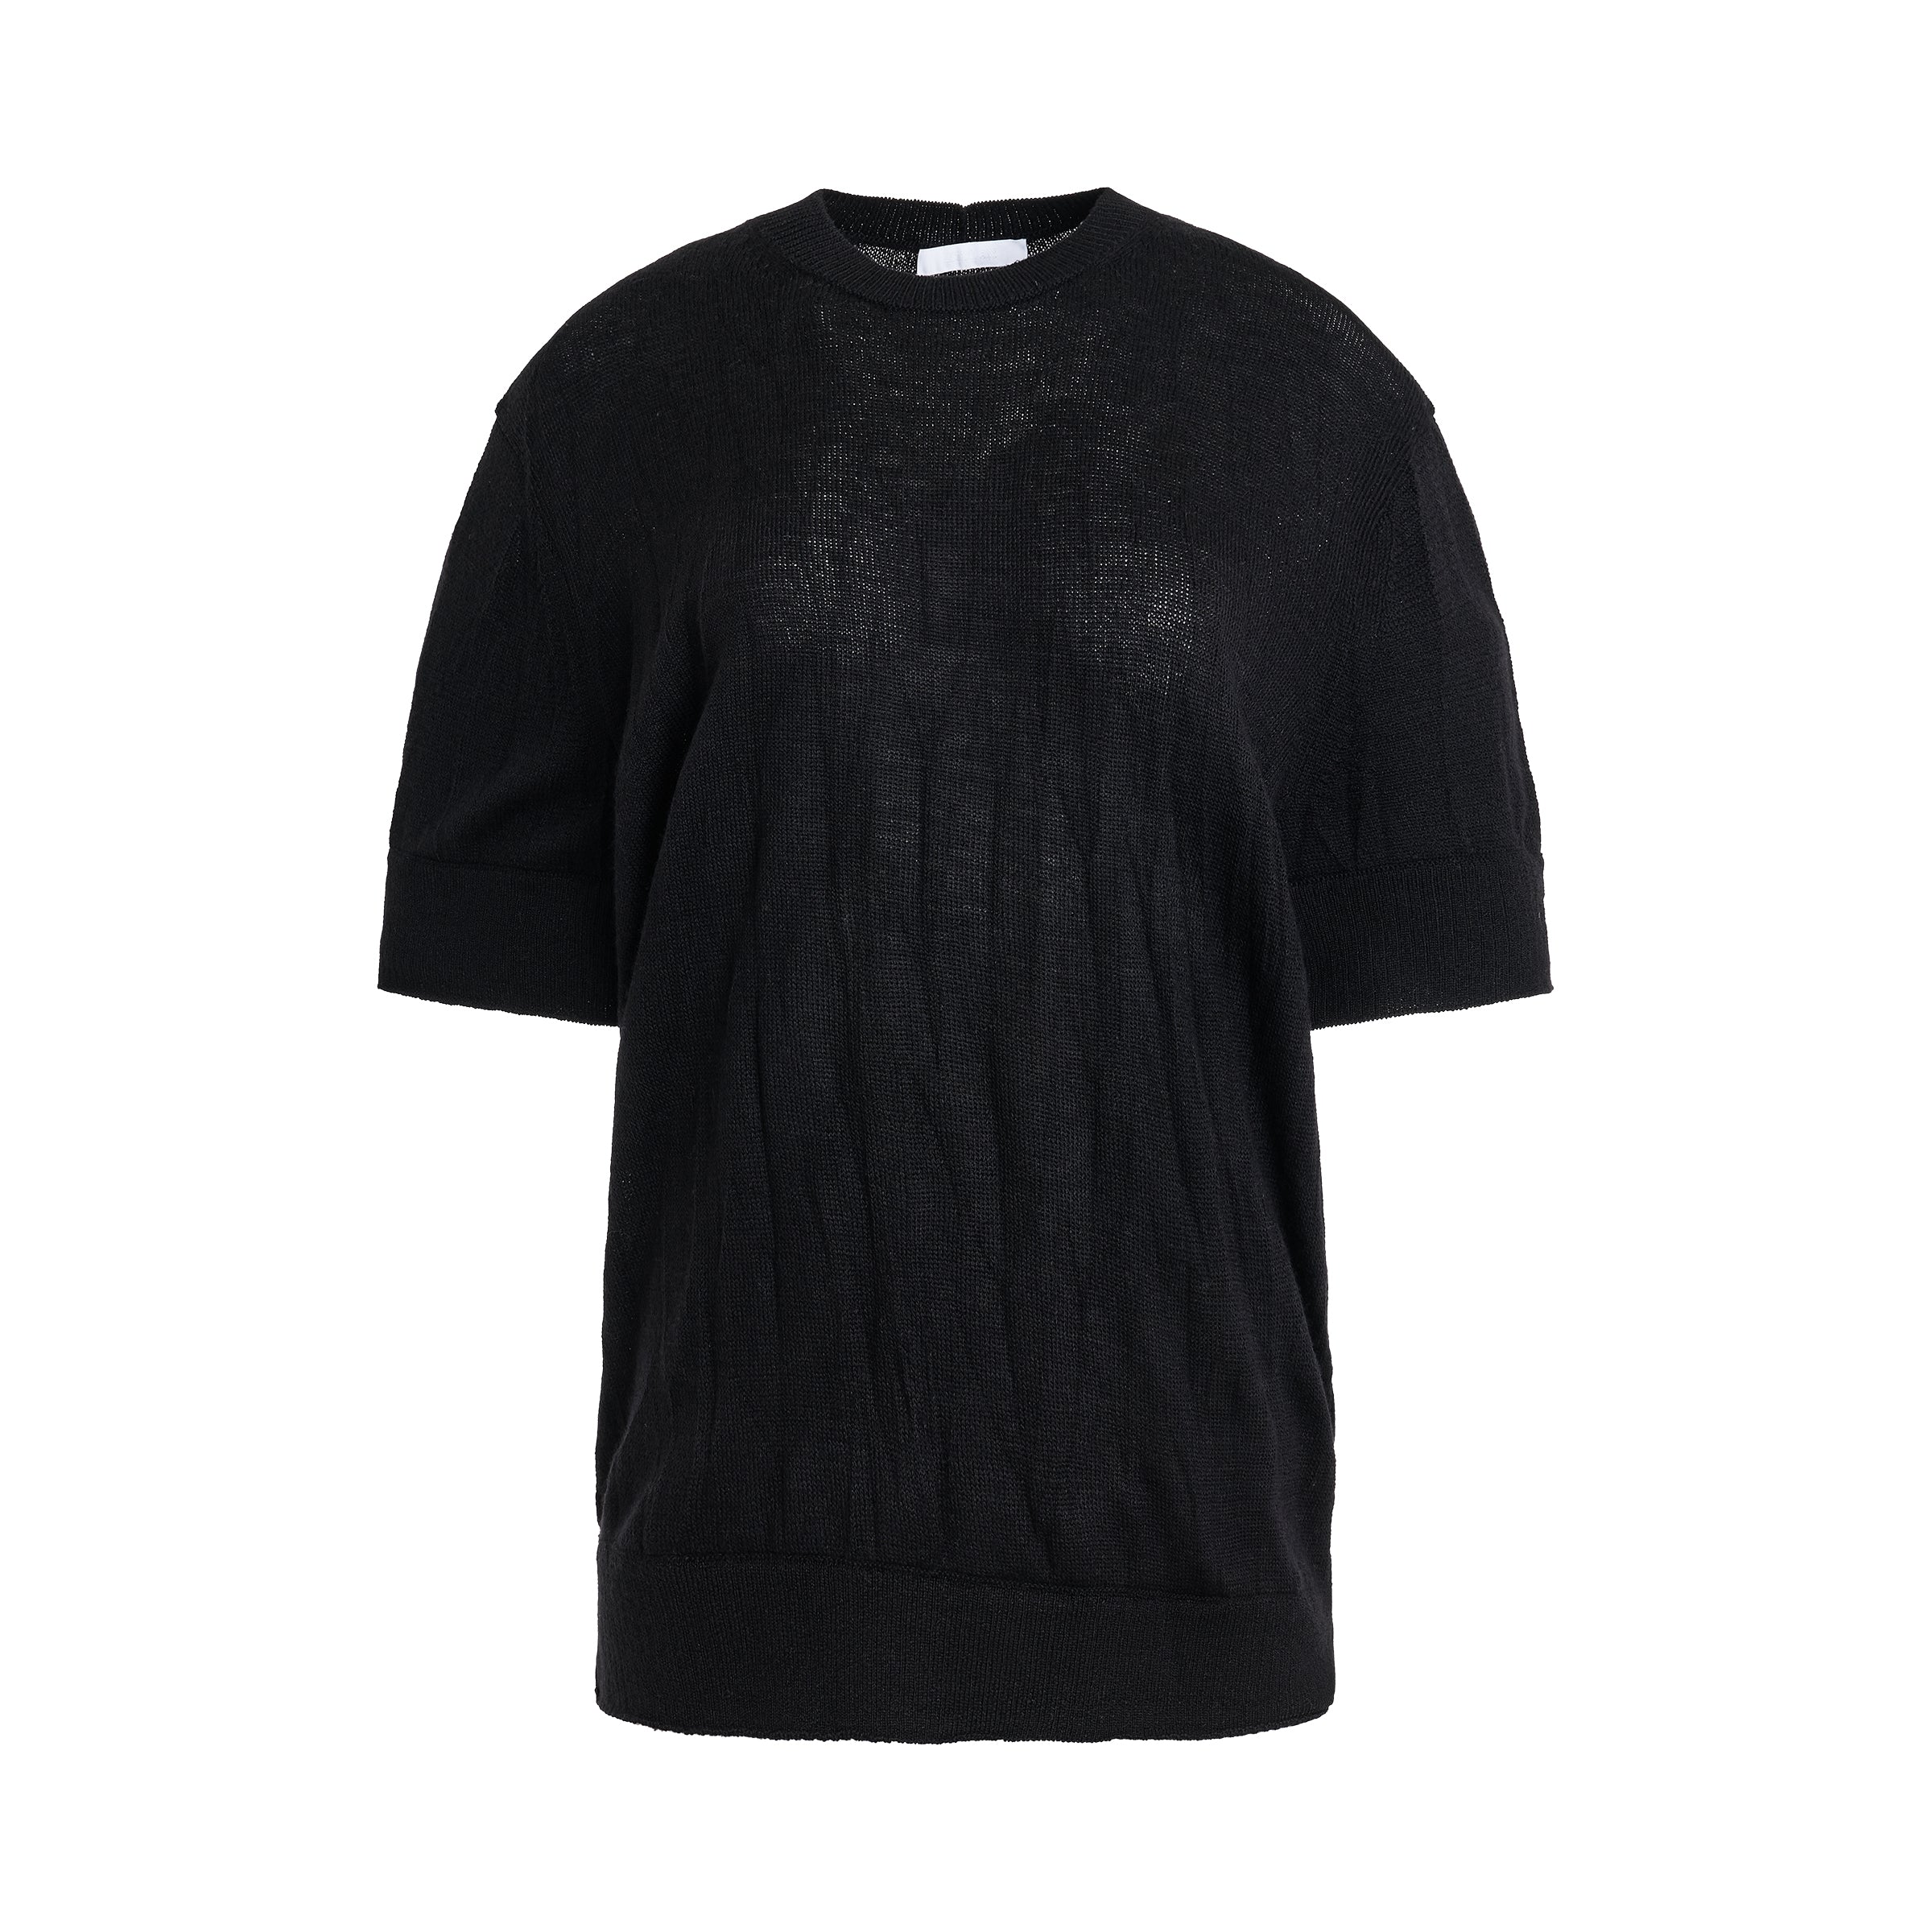 Crushed Knit T-Shirt in Black